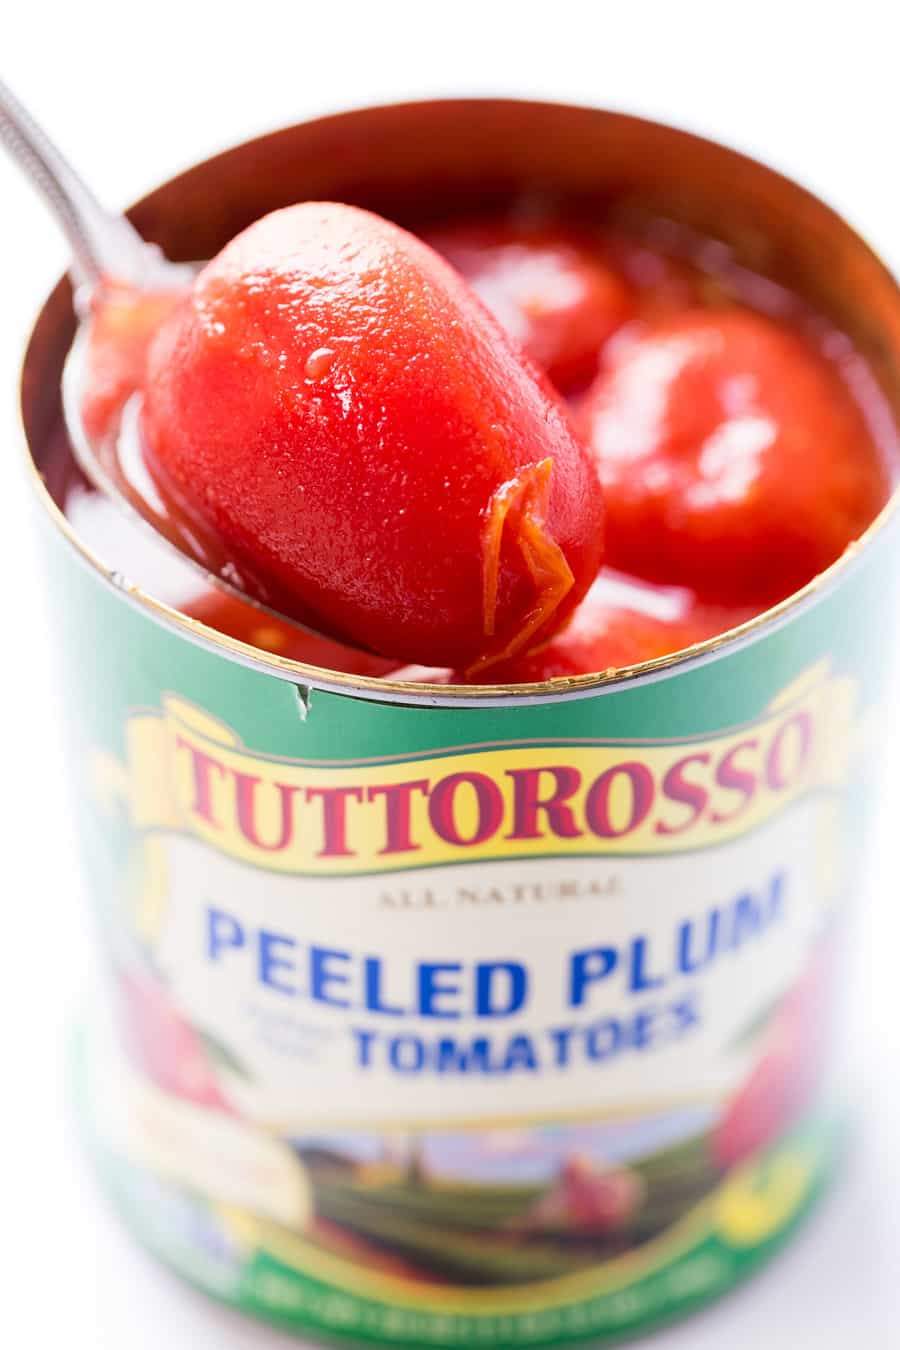 The BEST Whole Plum Tomatoes on the planet!